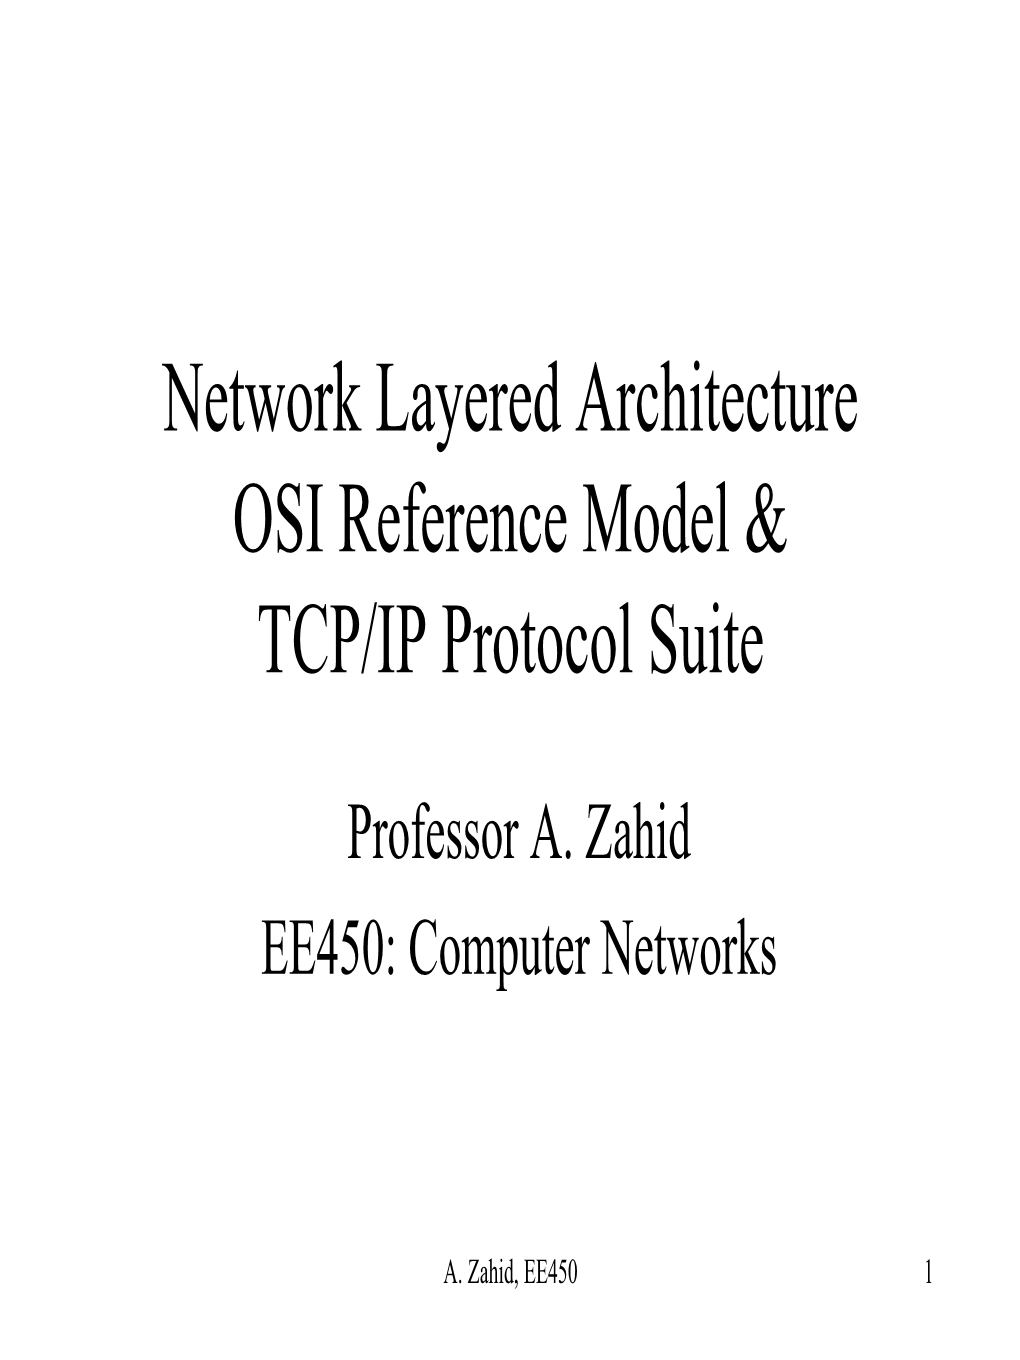 Network Layered Architecture OSI Reference Model & TCP/IP Protocol